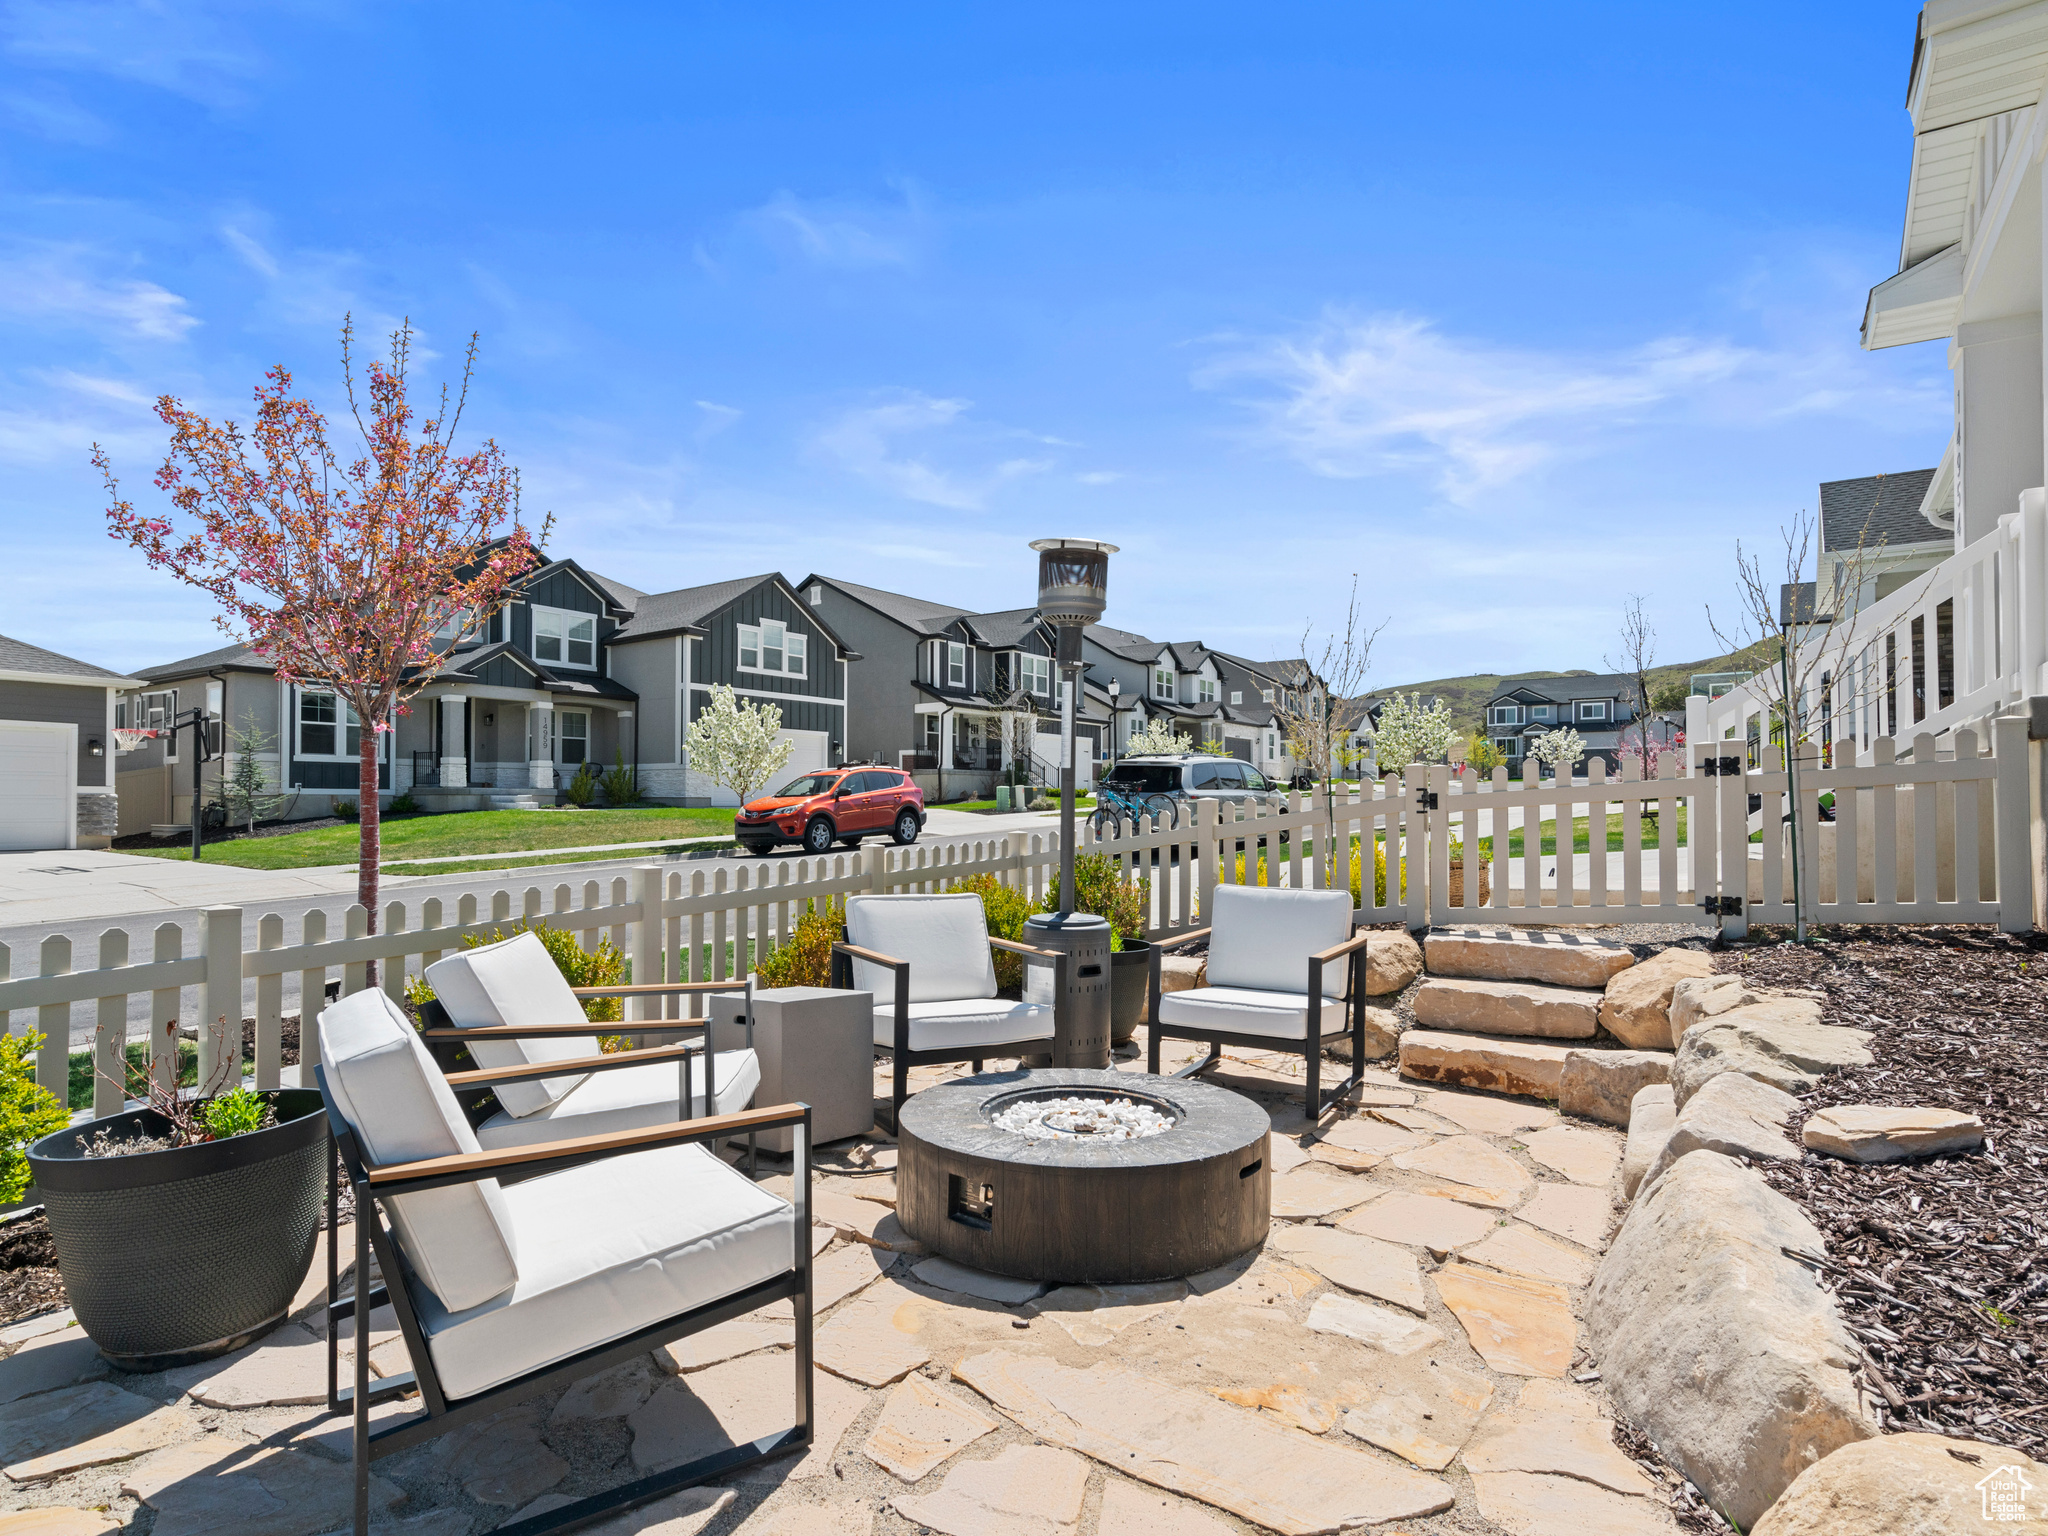 Relax in the flagstone fire pit area.